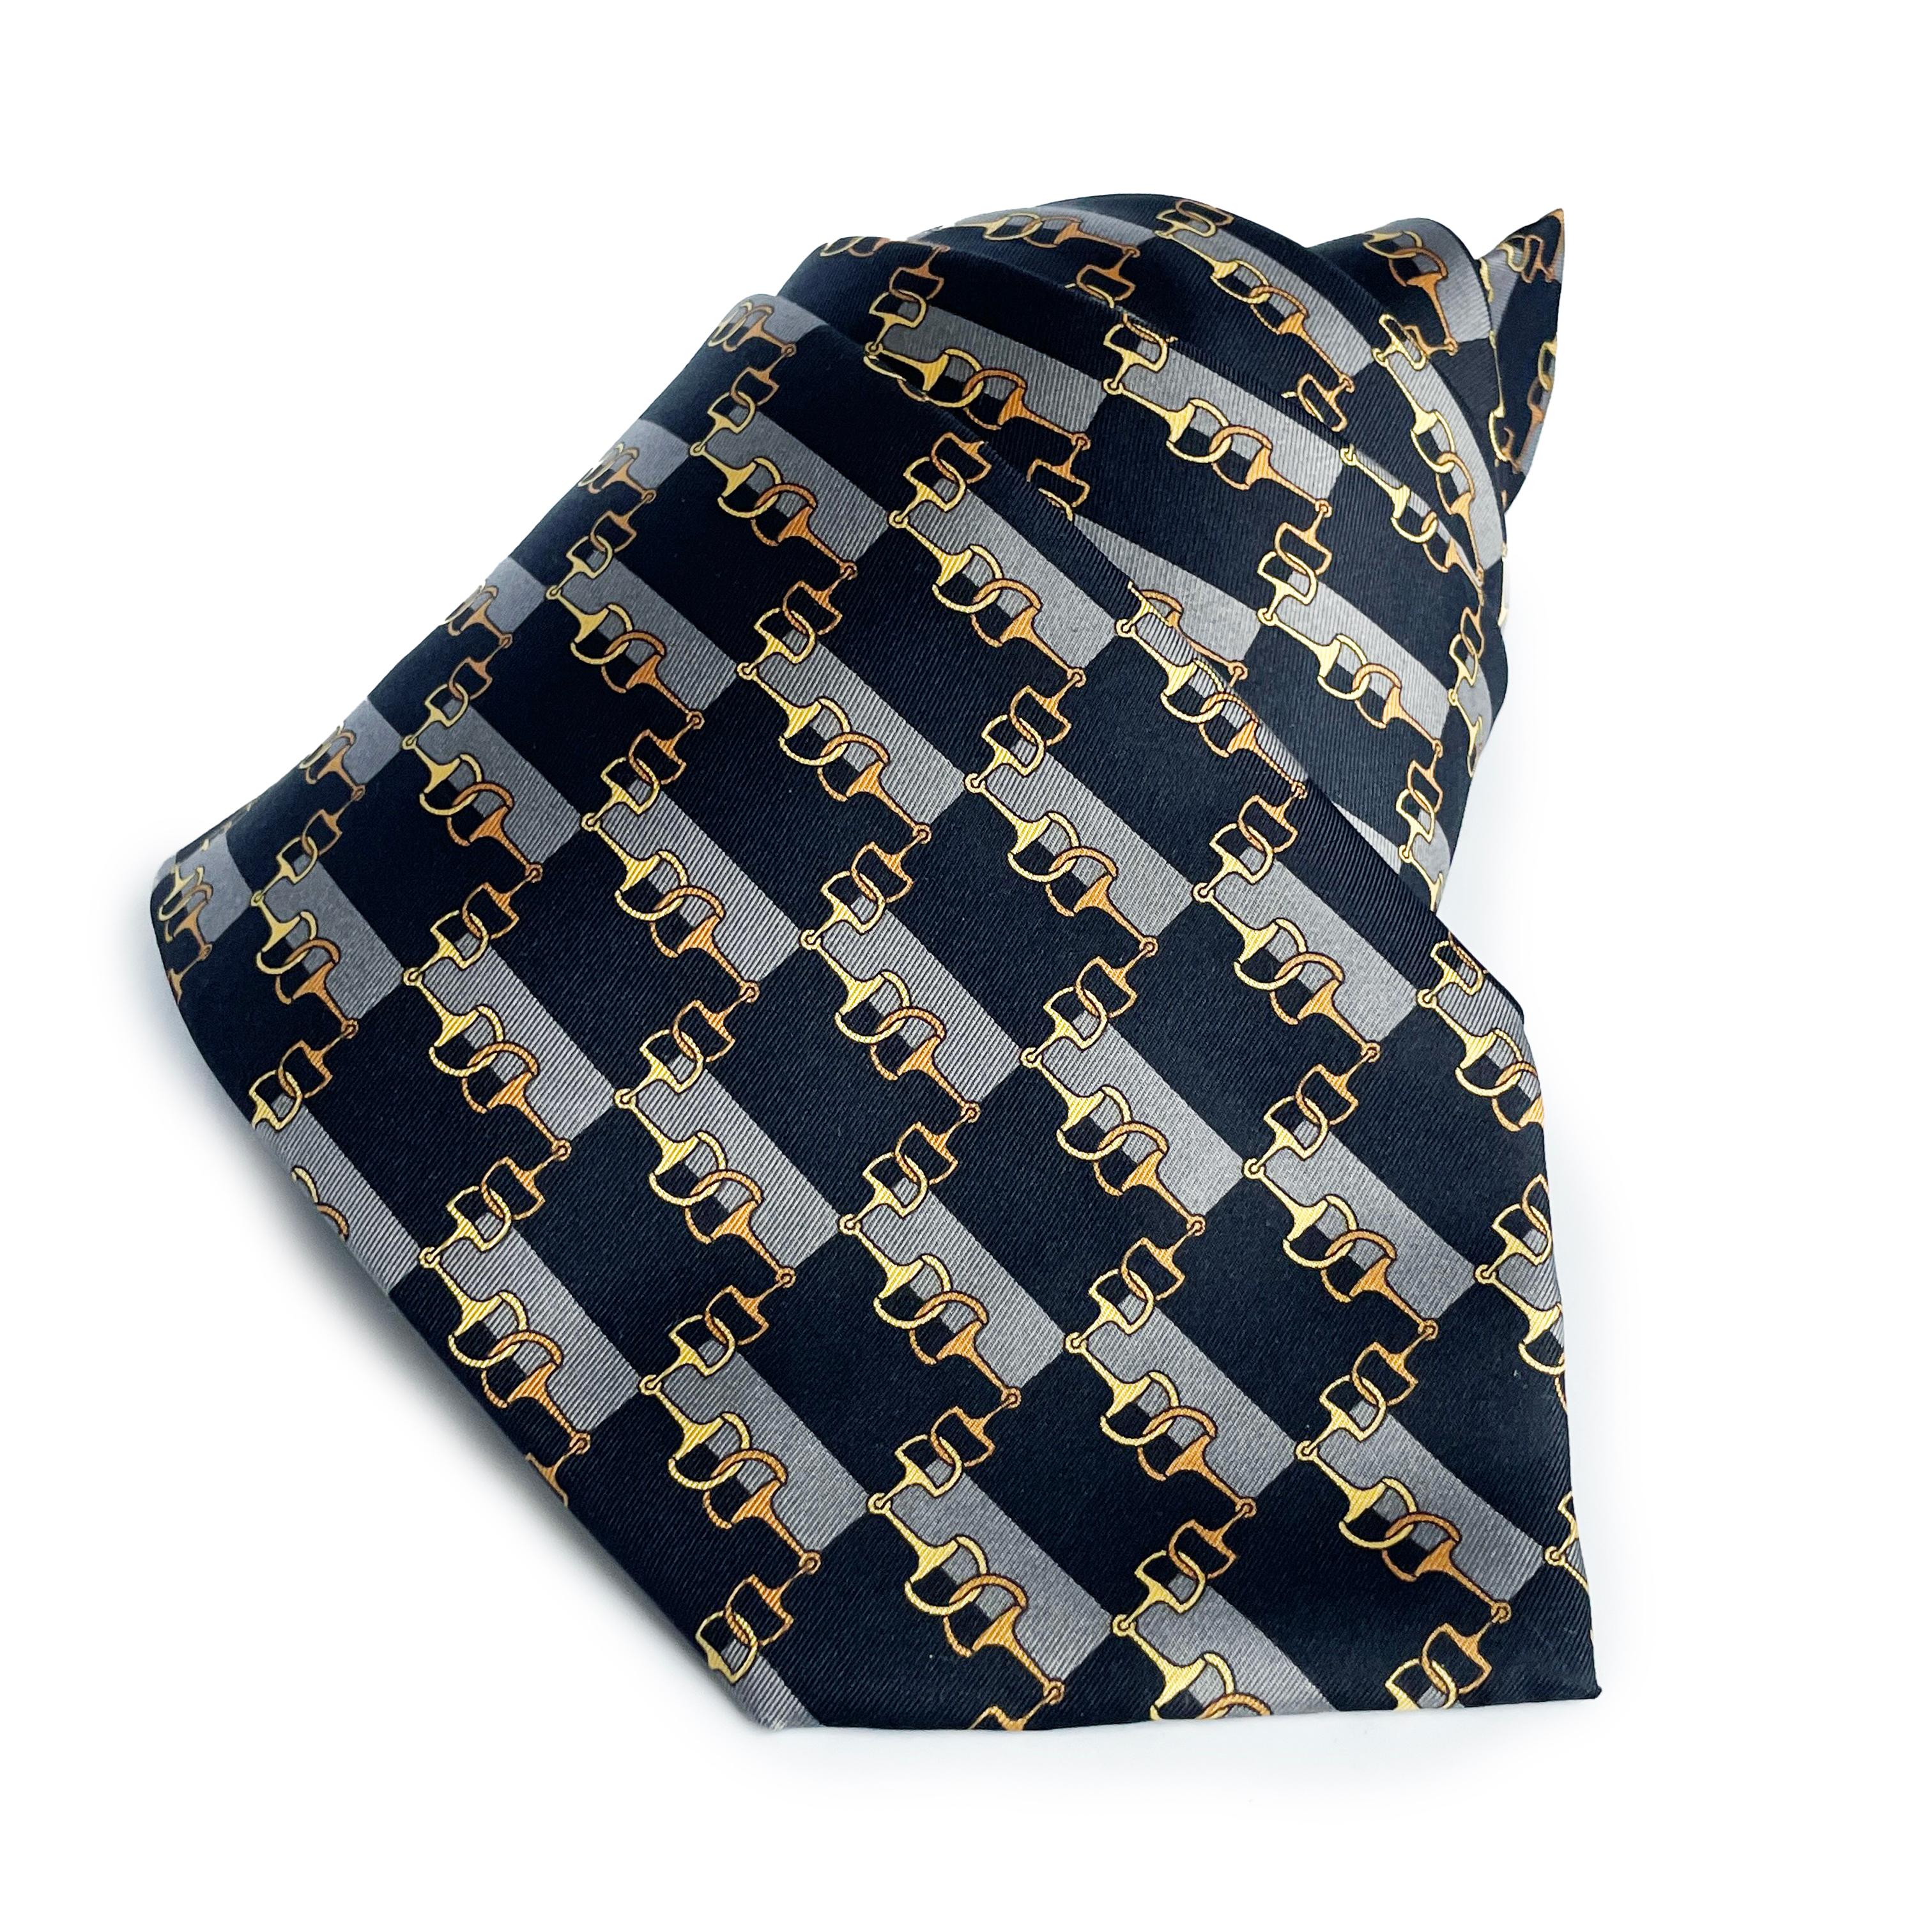 Preowned mens necktie by Fendi, likely made post 2000. Made from silk, it features an equestrian horse bit motif throughout.

Perfect for those of you who enjoy luxury accessories for work or play - or for those of you who collect.  The equestrian